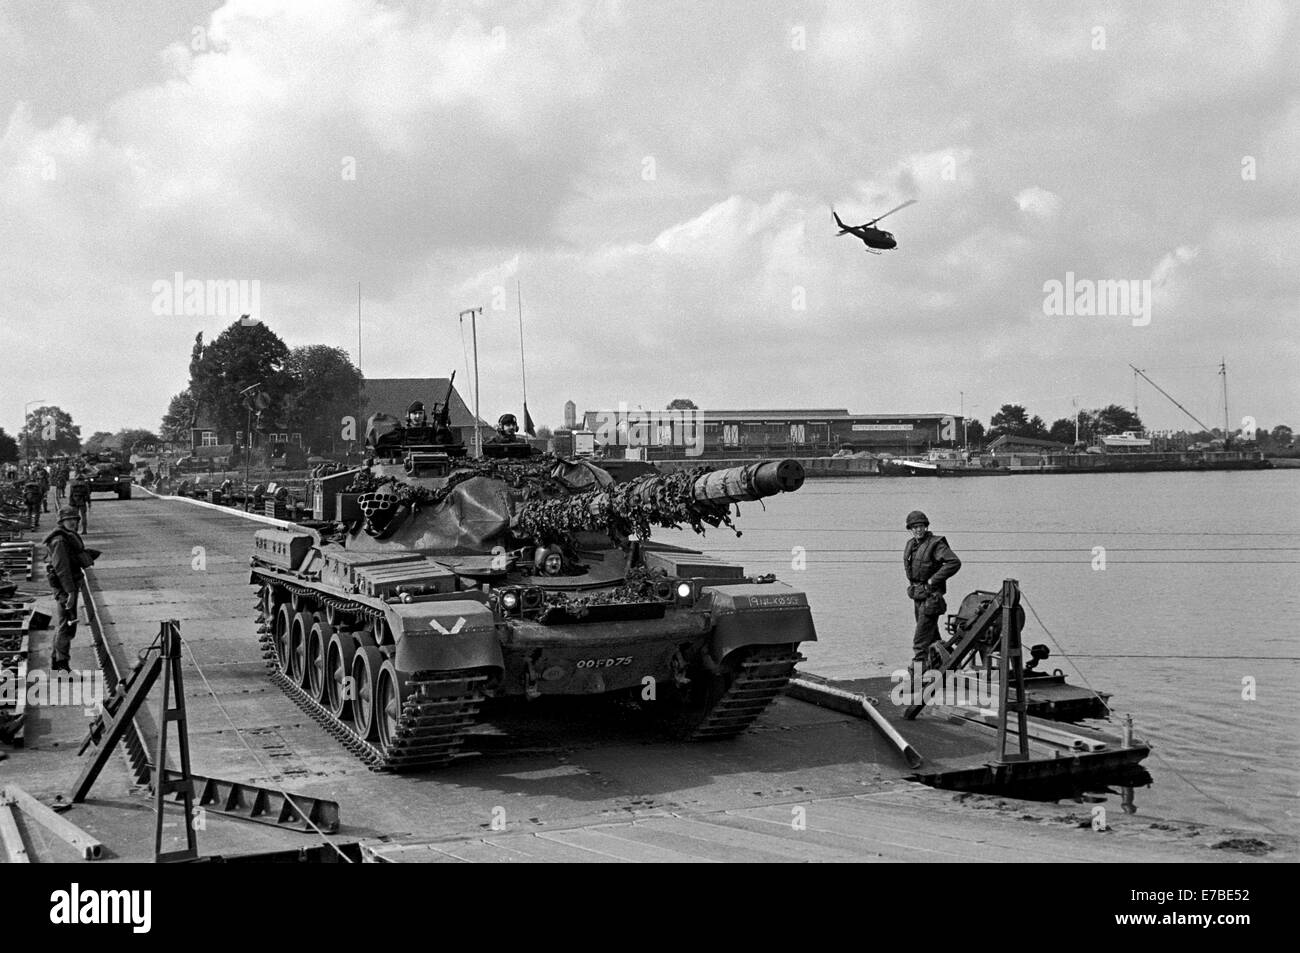 NATO exercises in the Netherlands, British tank 'Chieftain' cross a pontoon bridge over the river Meuse (October 1983) Stock Photo